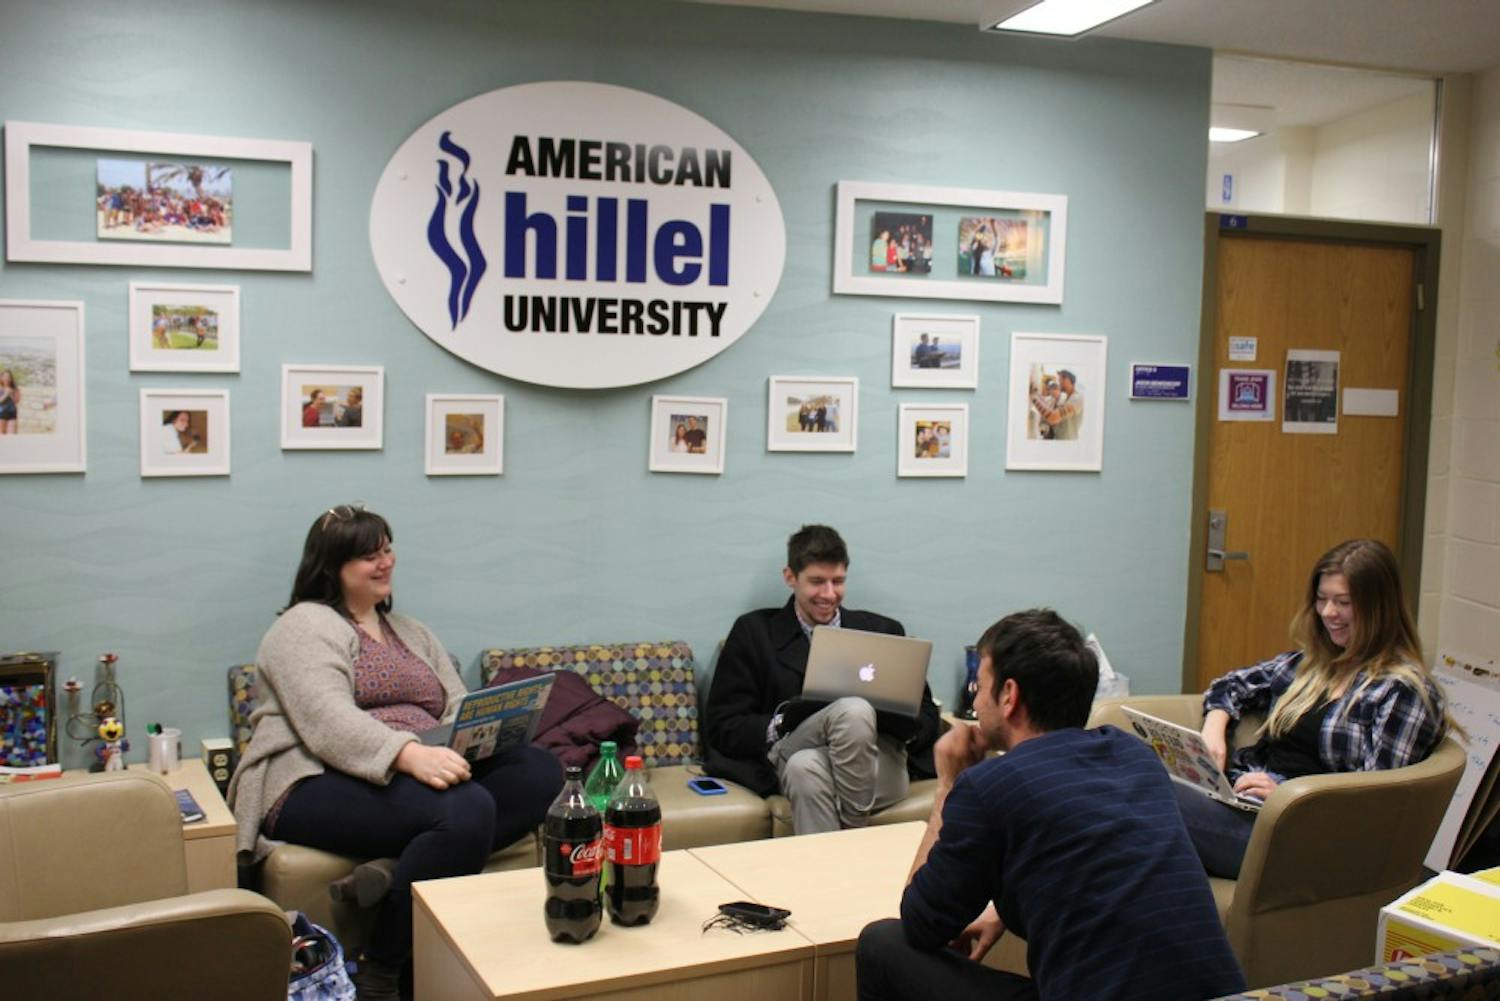 Students meet outside of Hillel's office in Kay Spiritual Life Center.